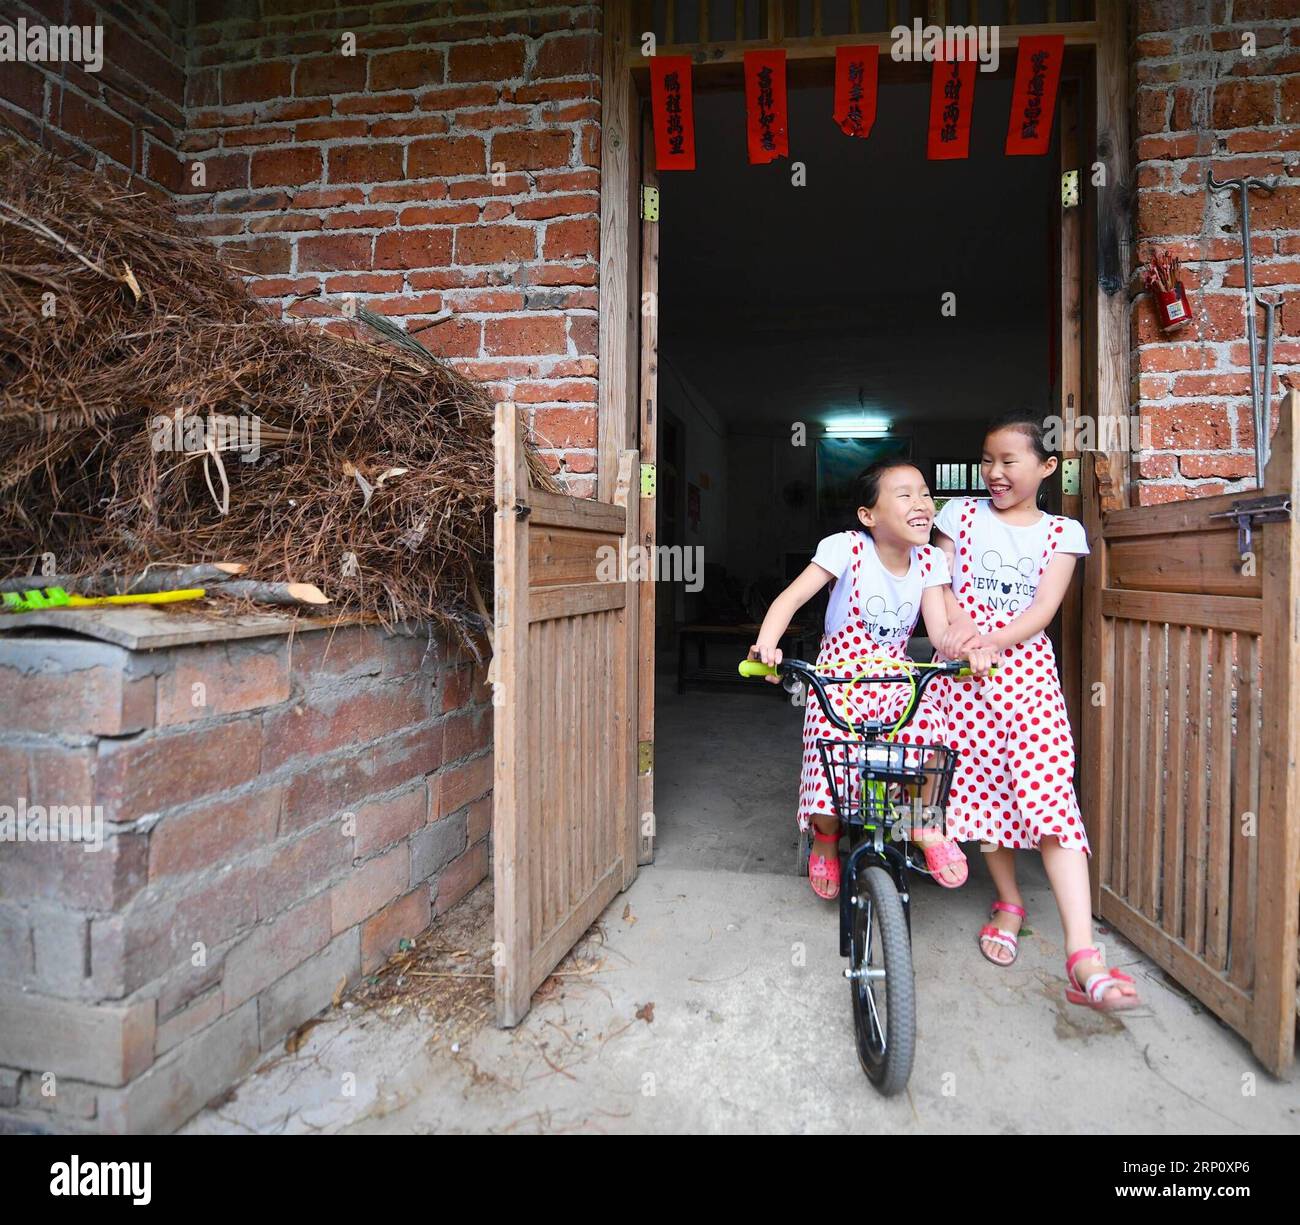 (180529) -- NANCHANG, May 29, 2018 -- Nine-year-old Zeng Jinrong (L) and her twin sister Zeng Jinyun are pictured at their home in Suolong Village of Yudu County, east China s Jiangxi Province, May 23, 2018. With about 1,000 residents, Suolong Village has 29 cases of multiple births, a high rate considering the modest population size. ) (lmm) CHINA-JIANGXI-VILLAGE-MULTIPLE BIRTHS-TWINS-LIFE (CN) HuxChenhuan PUBLICATIONxNOTxINxCHN Stock Photo